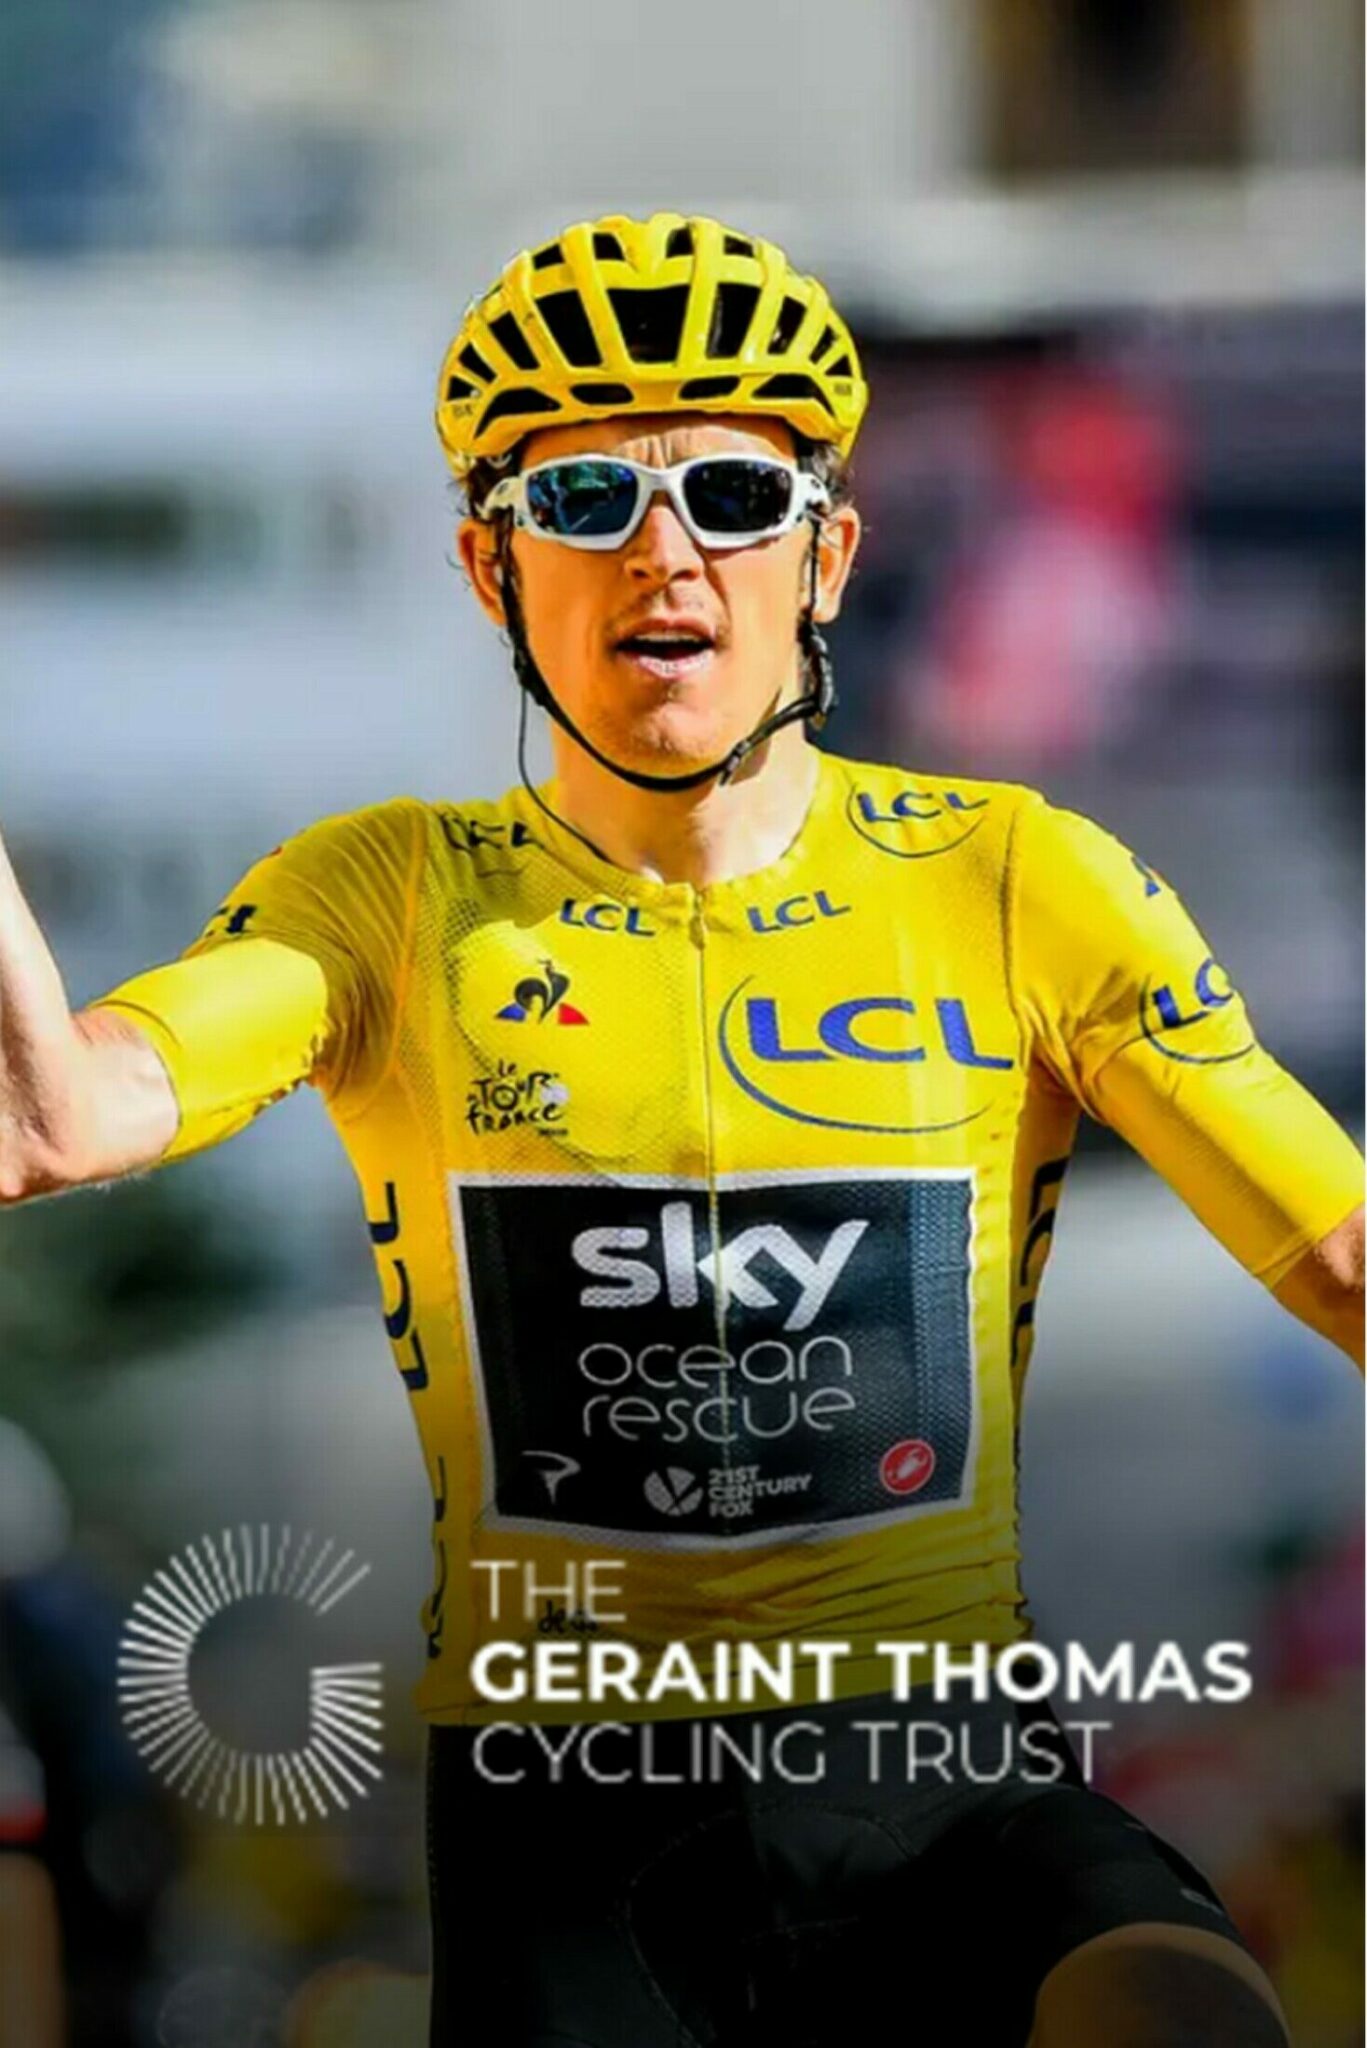 Geraint Thomas cycling with the charity logo at the bottom